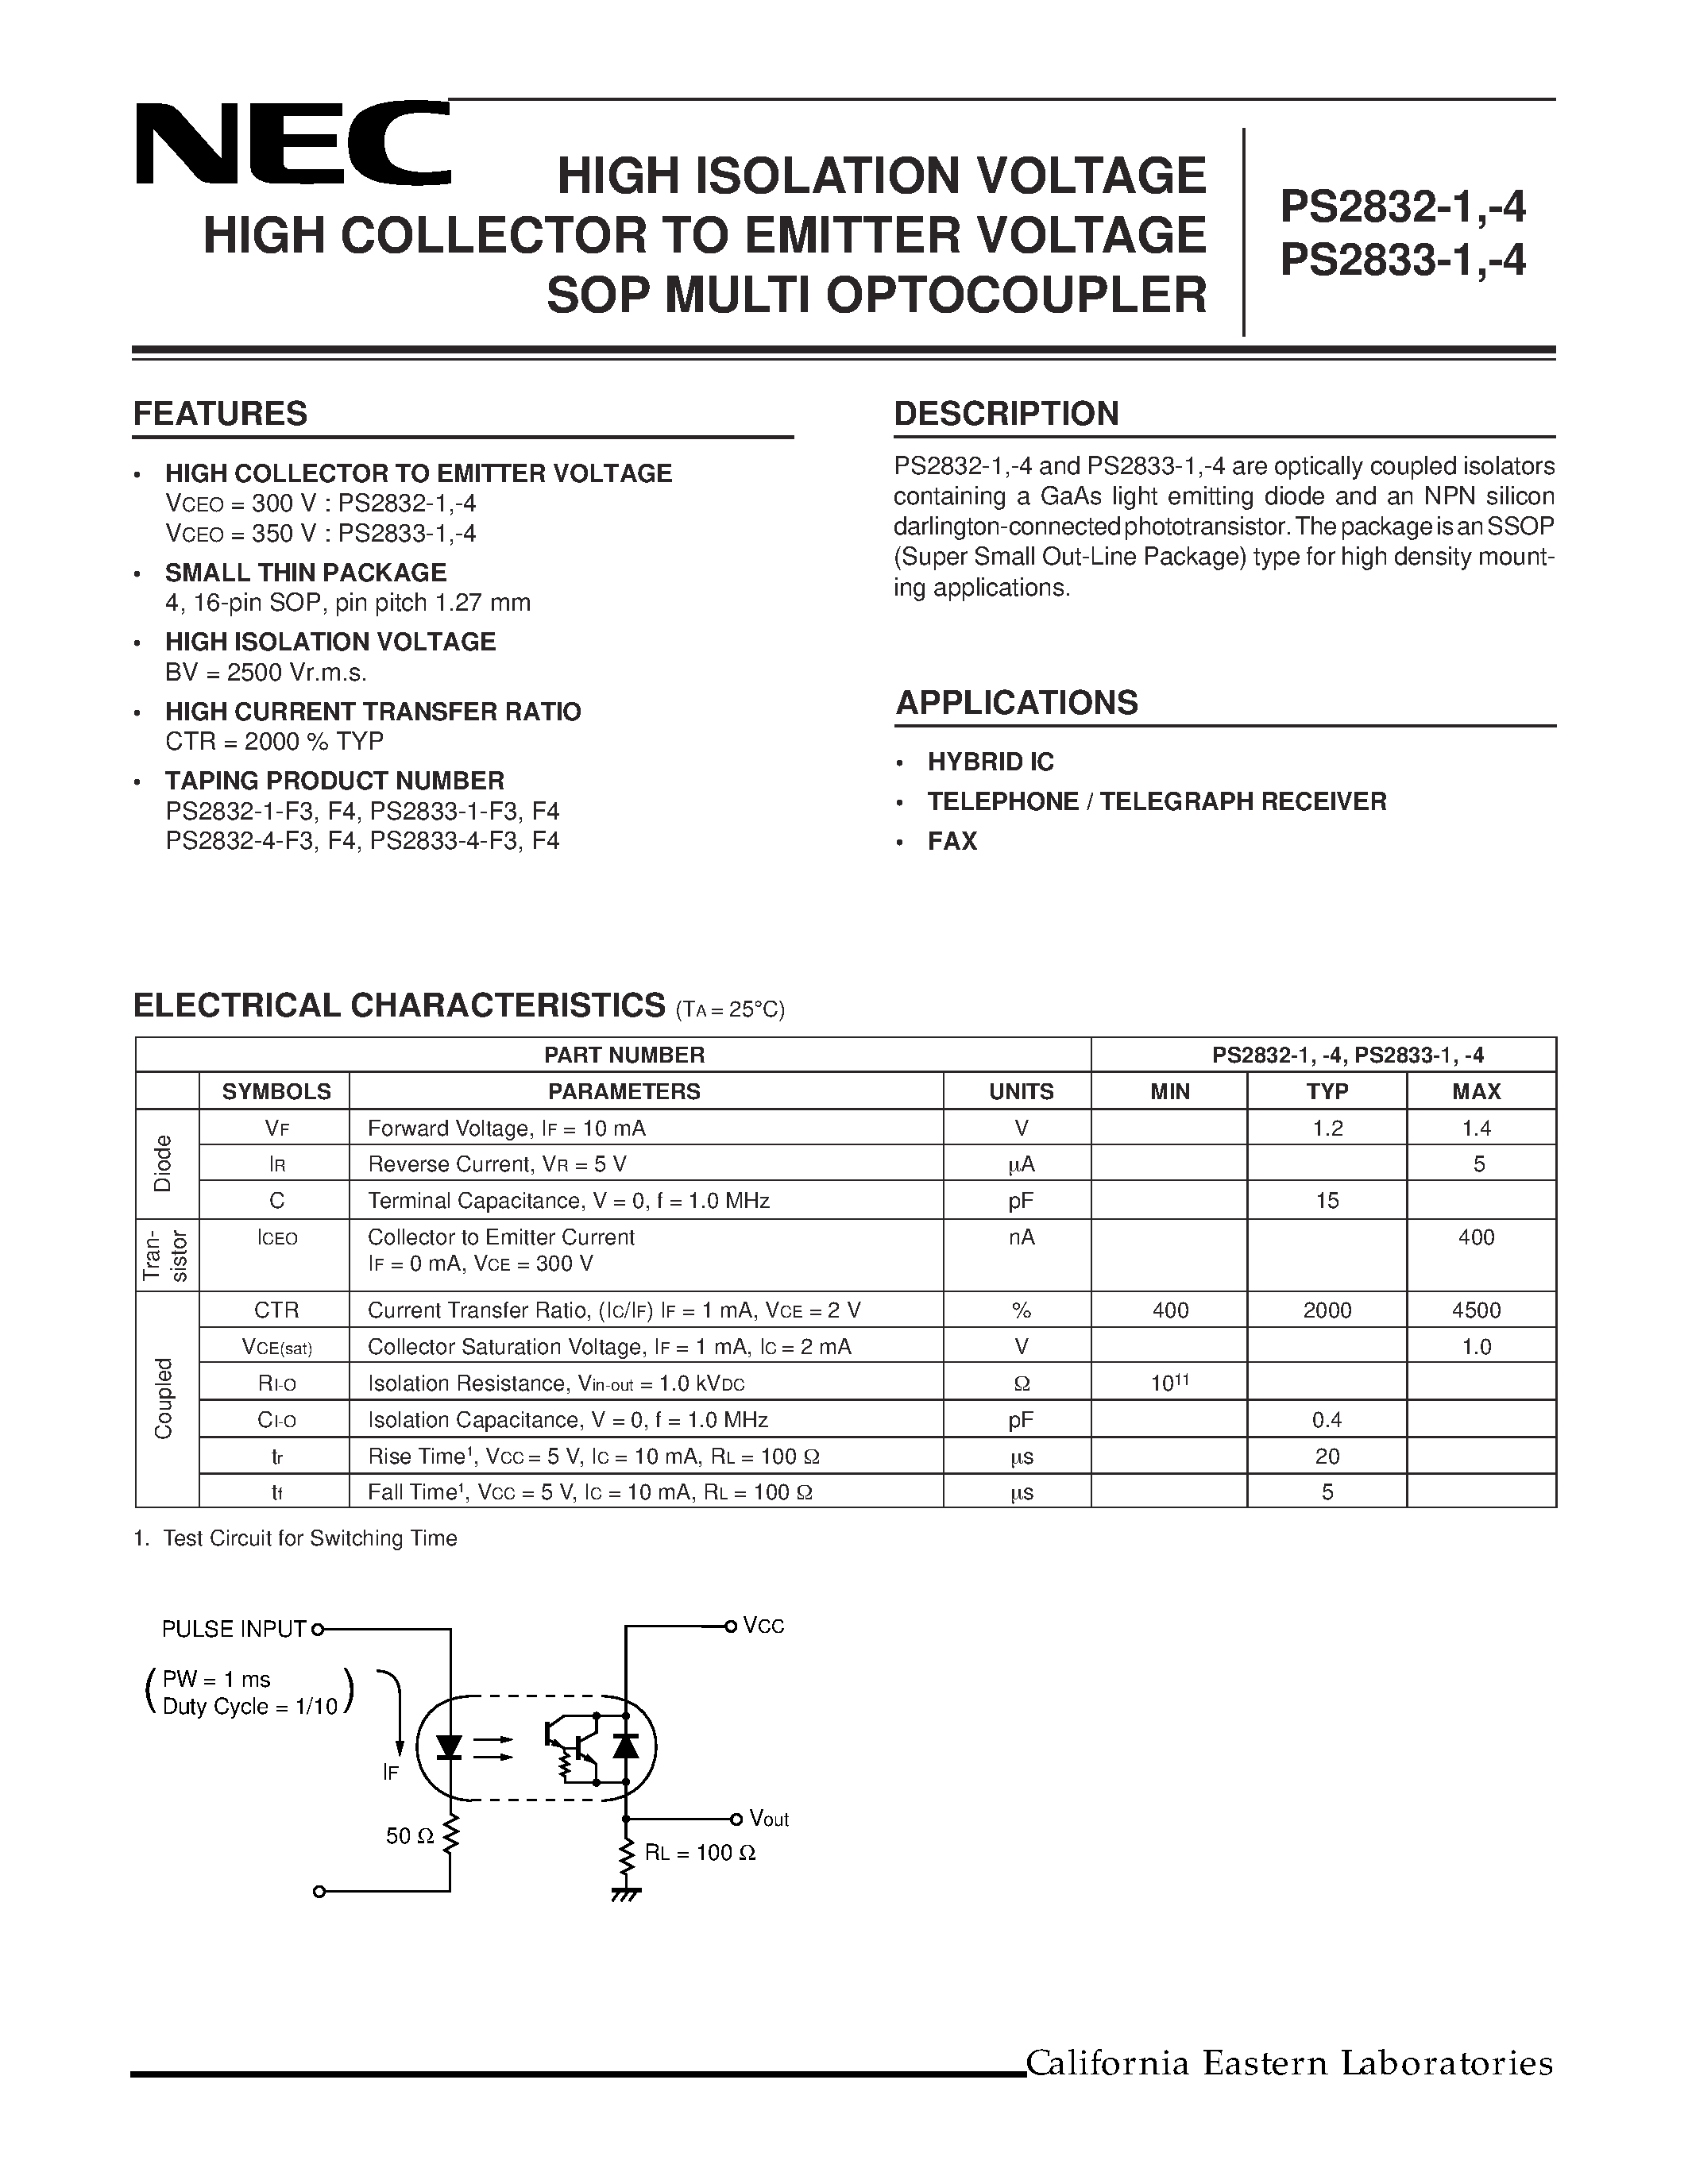 Datasheet PS2832-4-V-F3 - HIGH ISOLATION VOLTAGE HIGH COLLECTOR TO EMITTER VOLTAGE SOP MULTI OPTOCOUPLER page 1